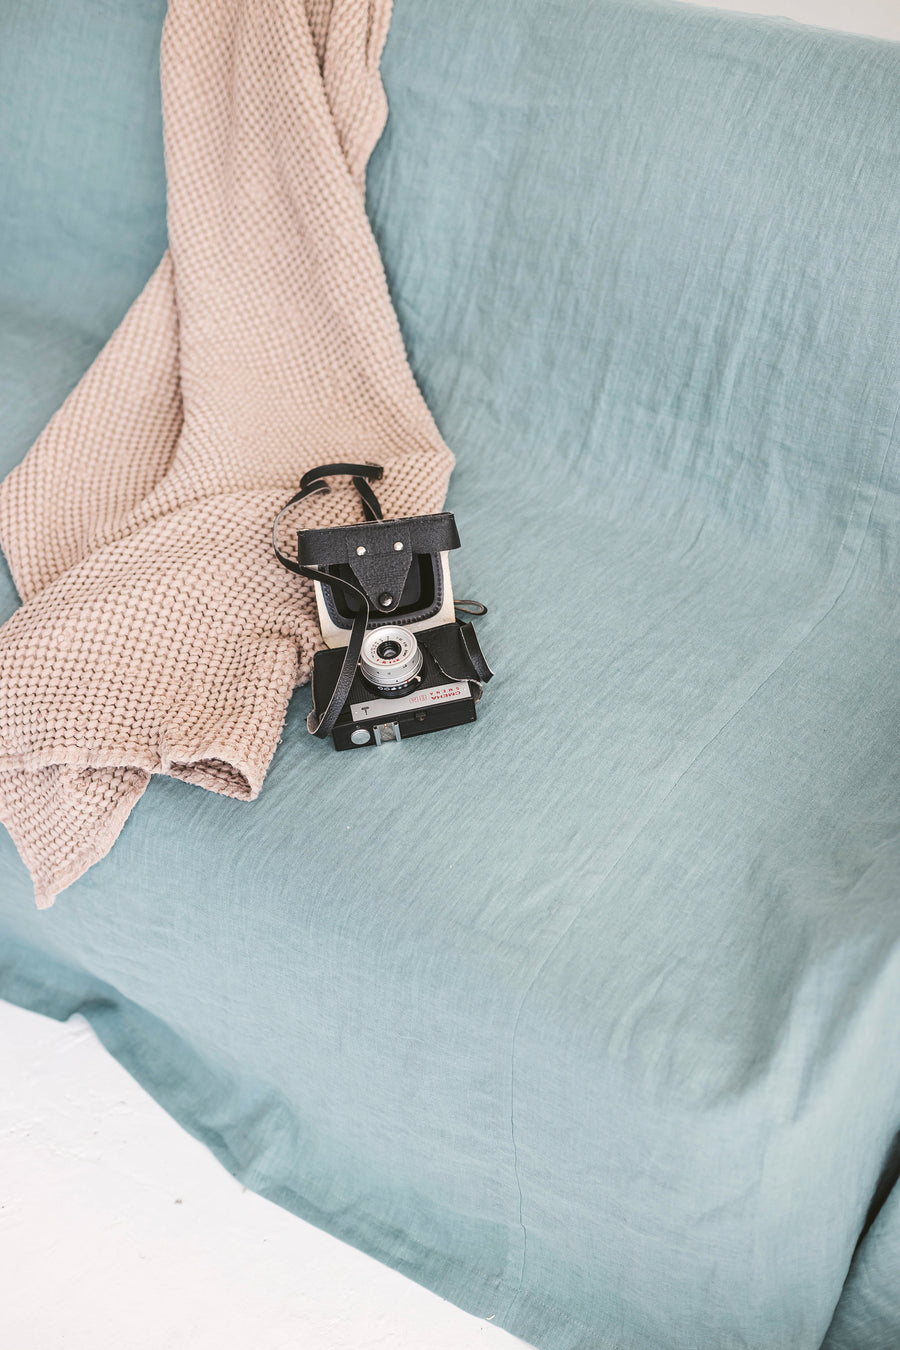 Dusty Aqua Linen Couch Cover